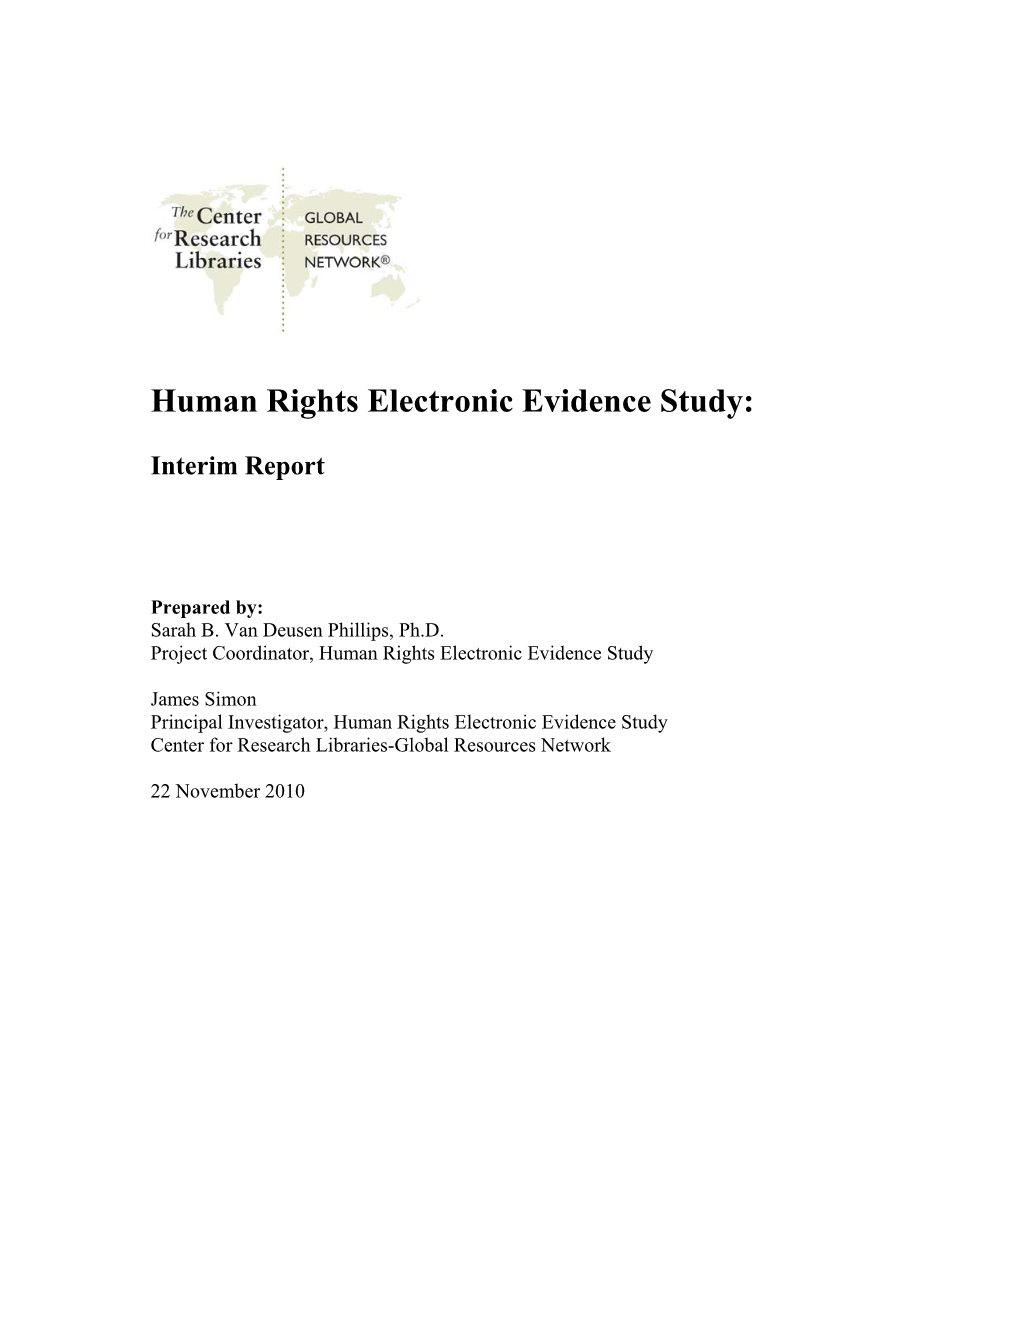 Human Rights Electronic Evidence Study: Interim Report